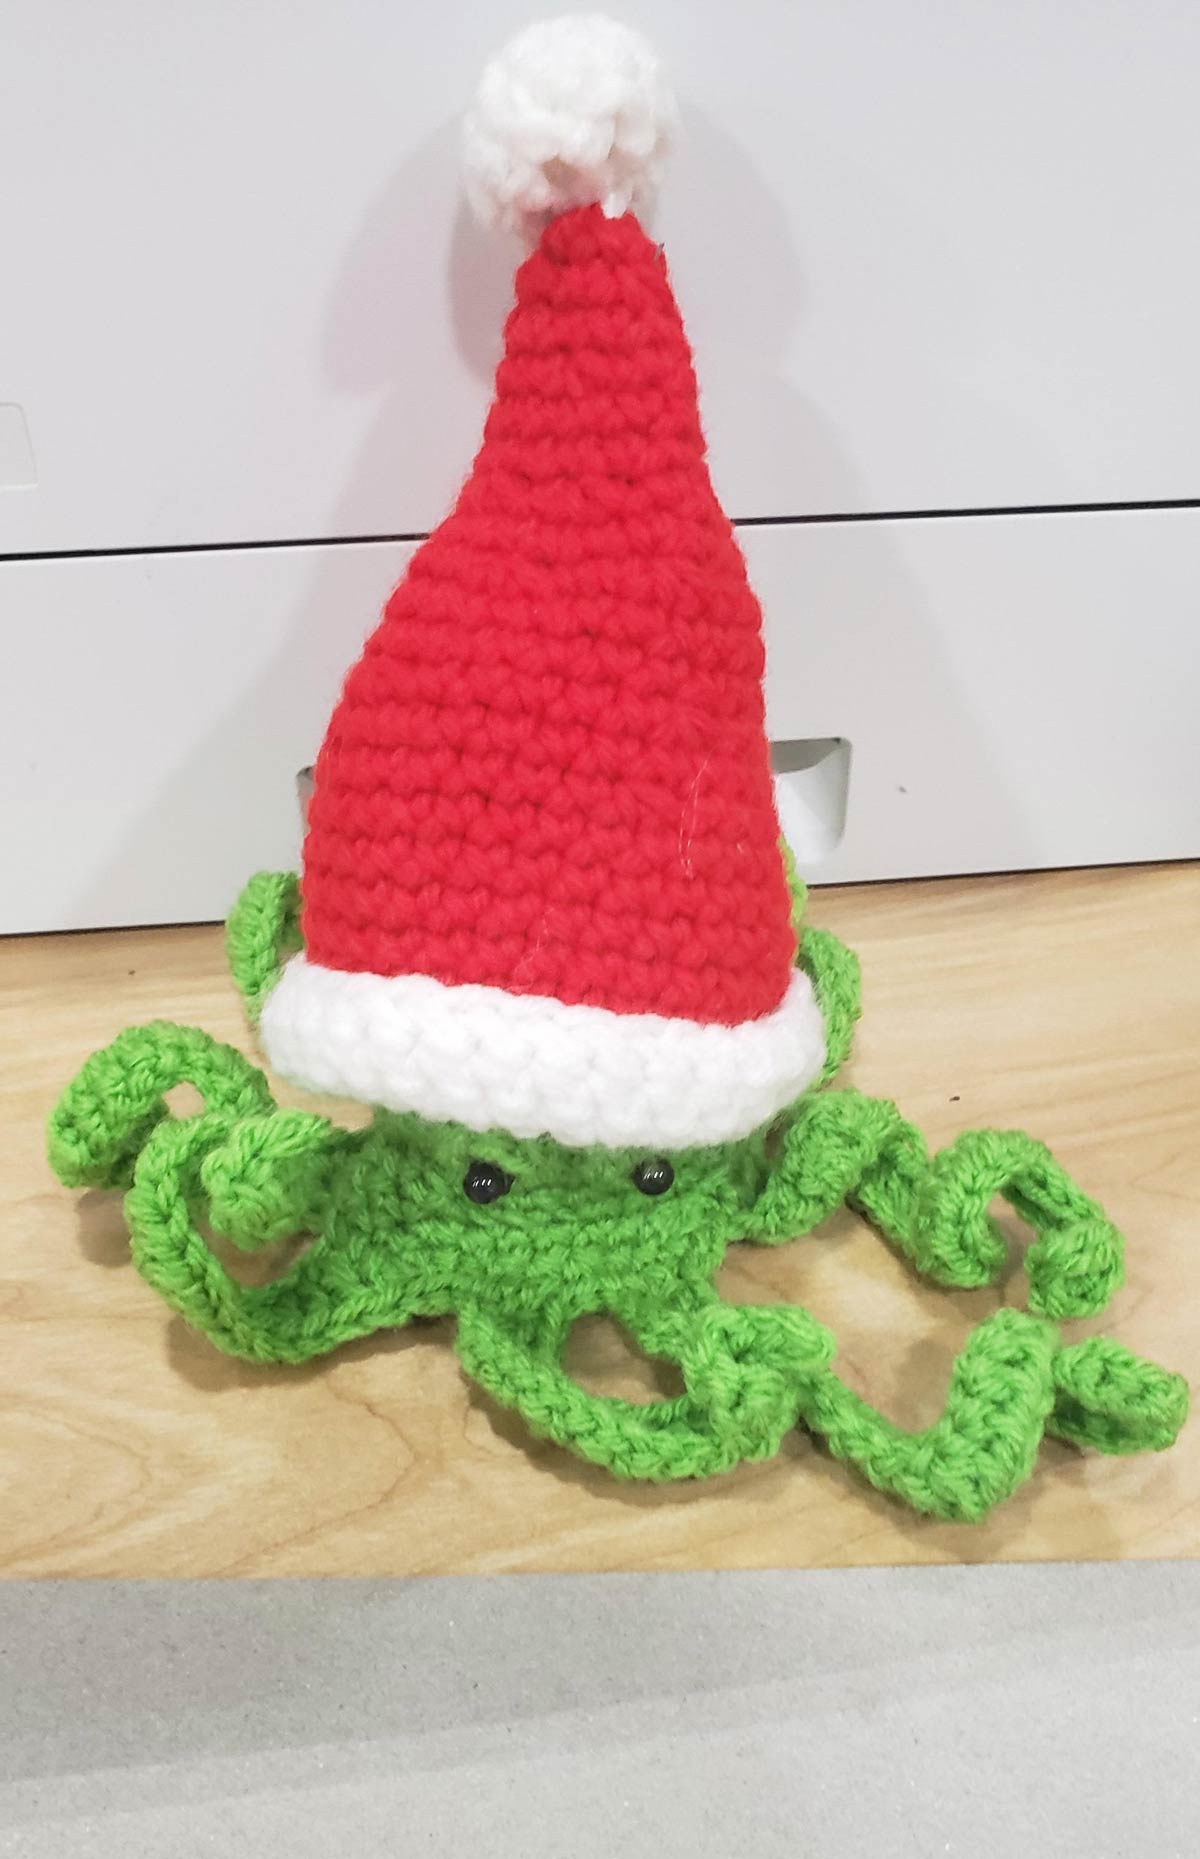 One of my coworkers has a Christmas Kraken on their desk